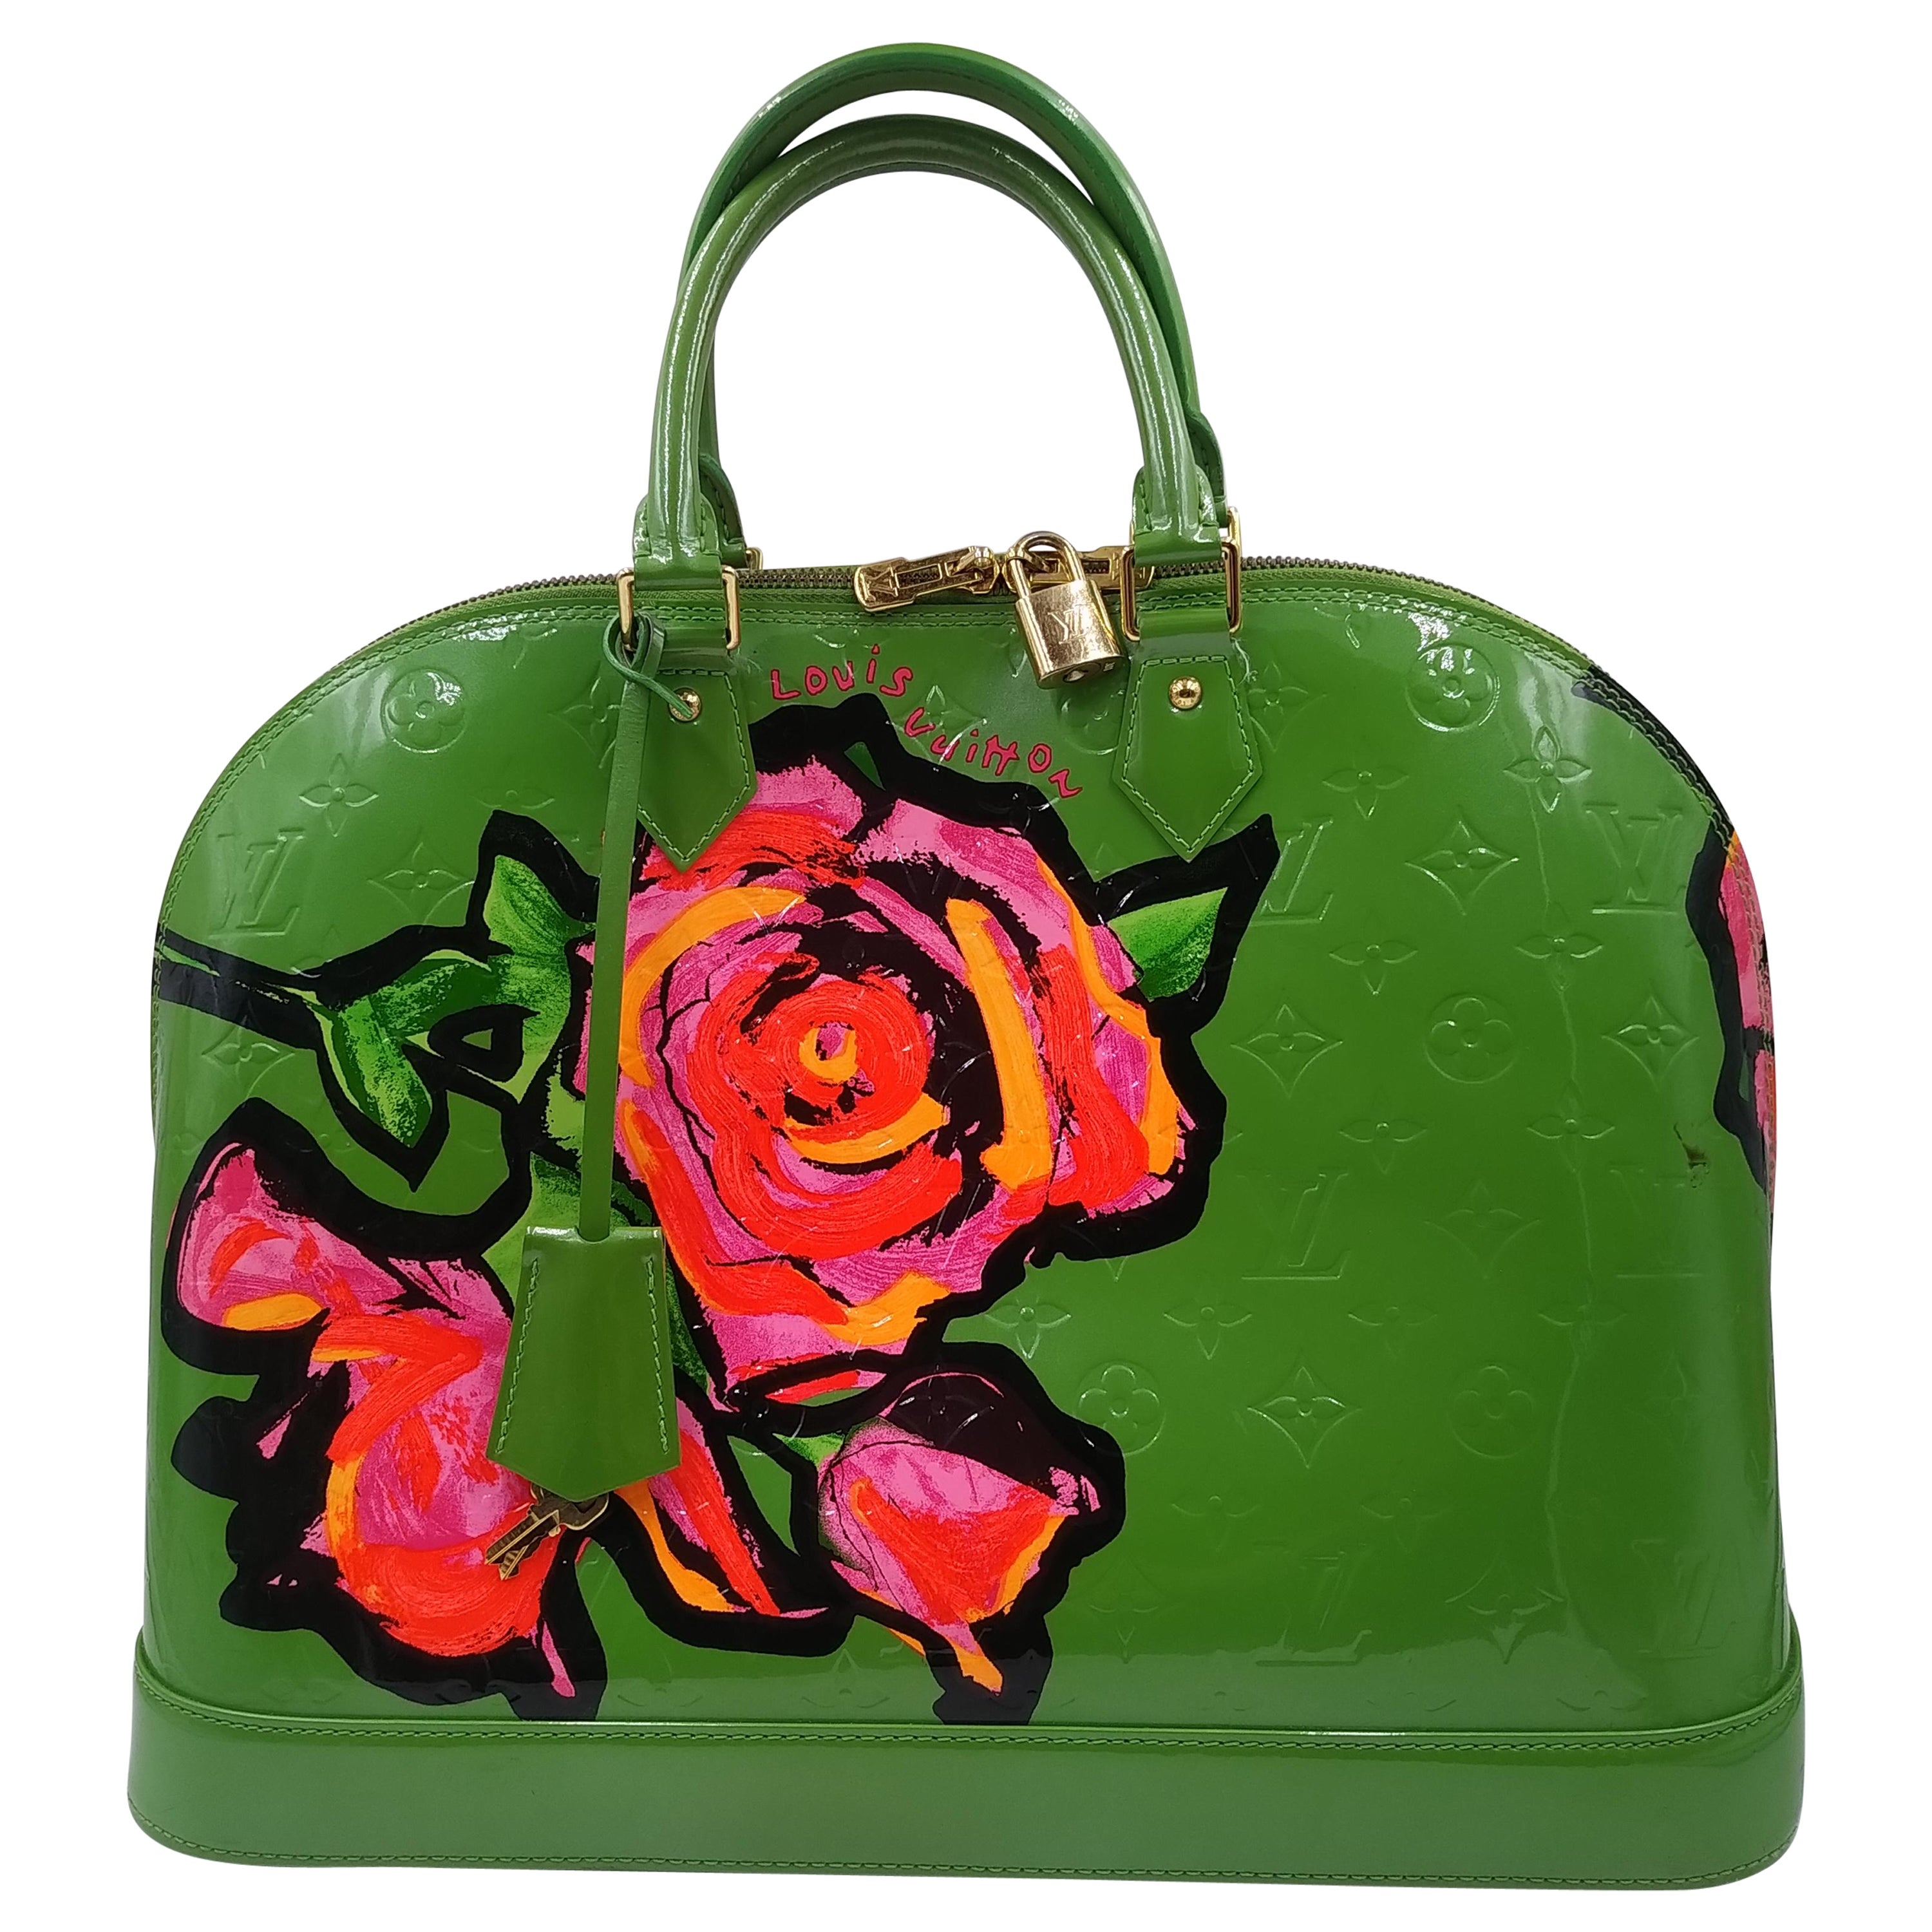 Louis Vuitton Stephen Sprouse Roses Limited Edition + Cross body